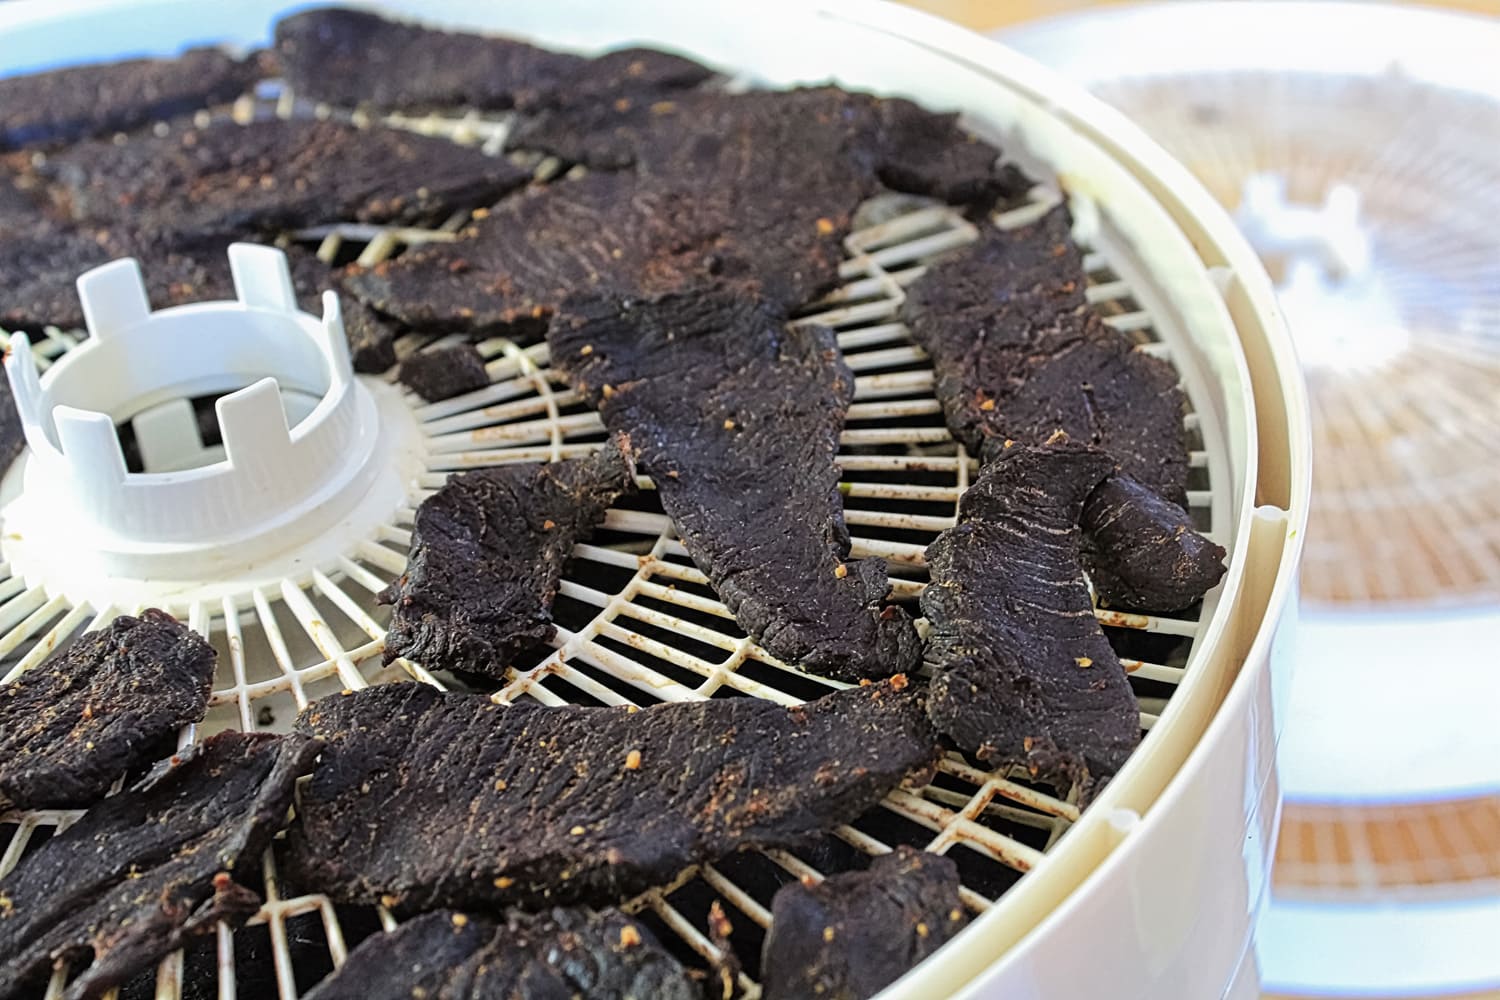 Closeup of dried spiced deer jerky slices on a dehydrator.